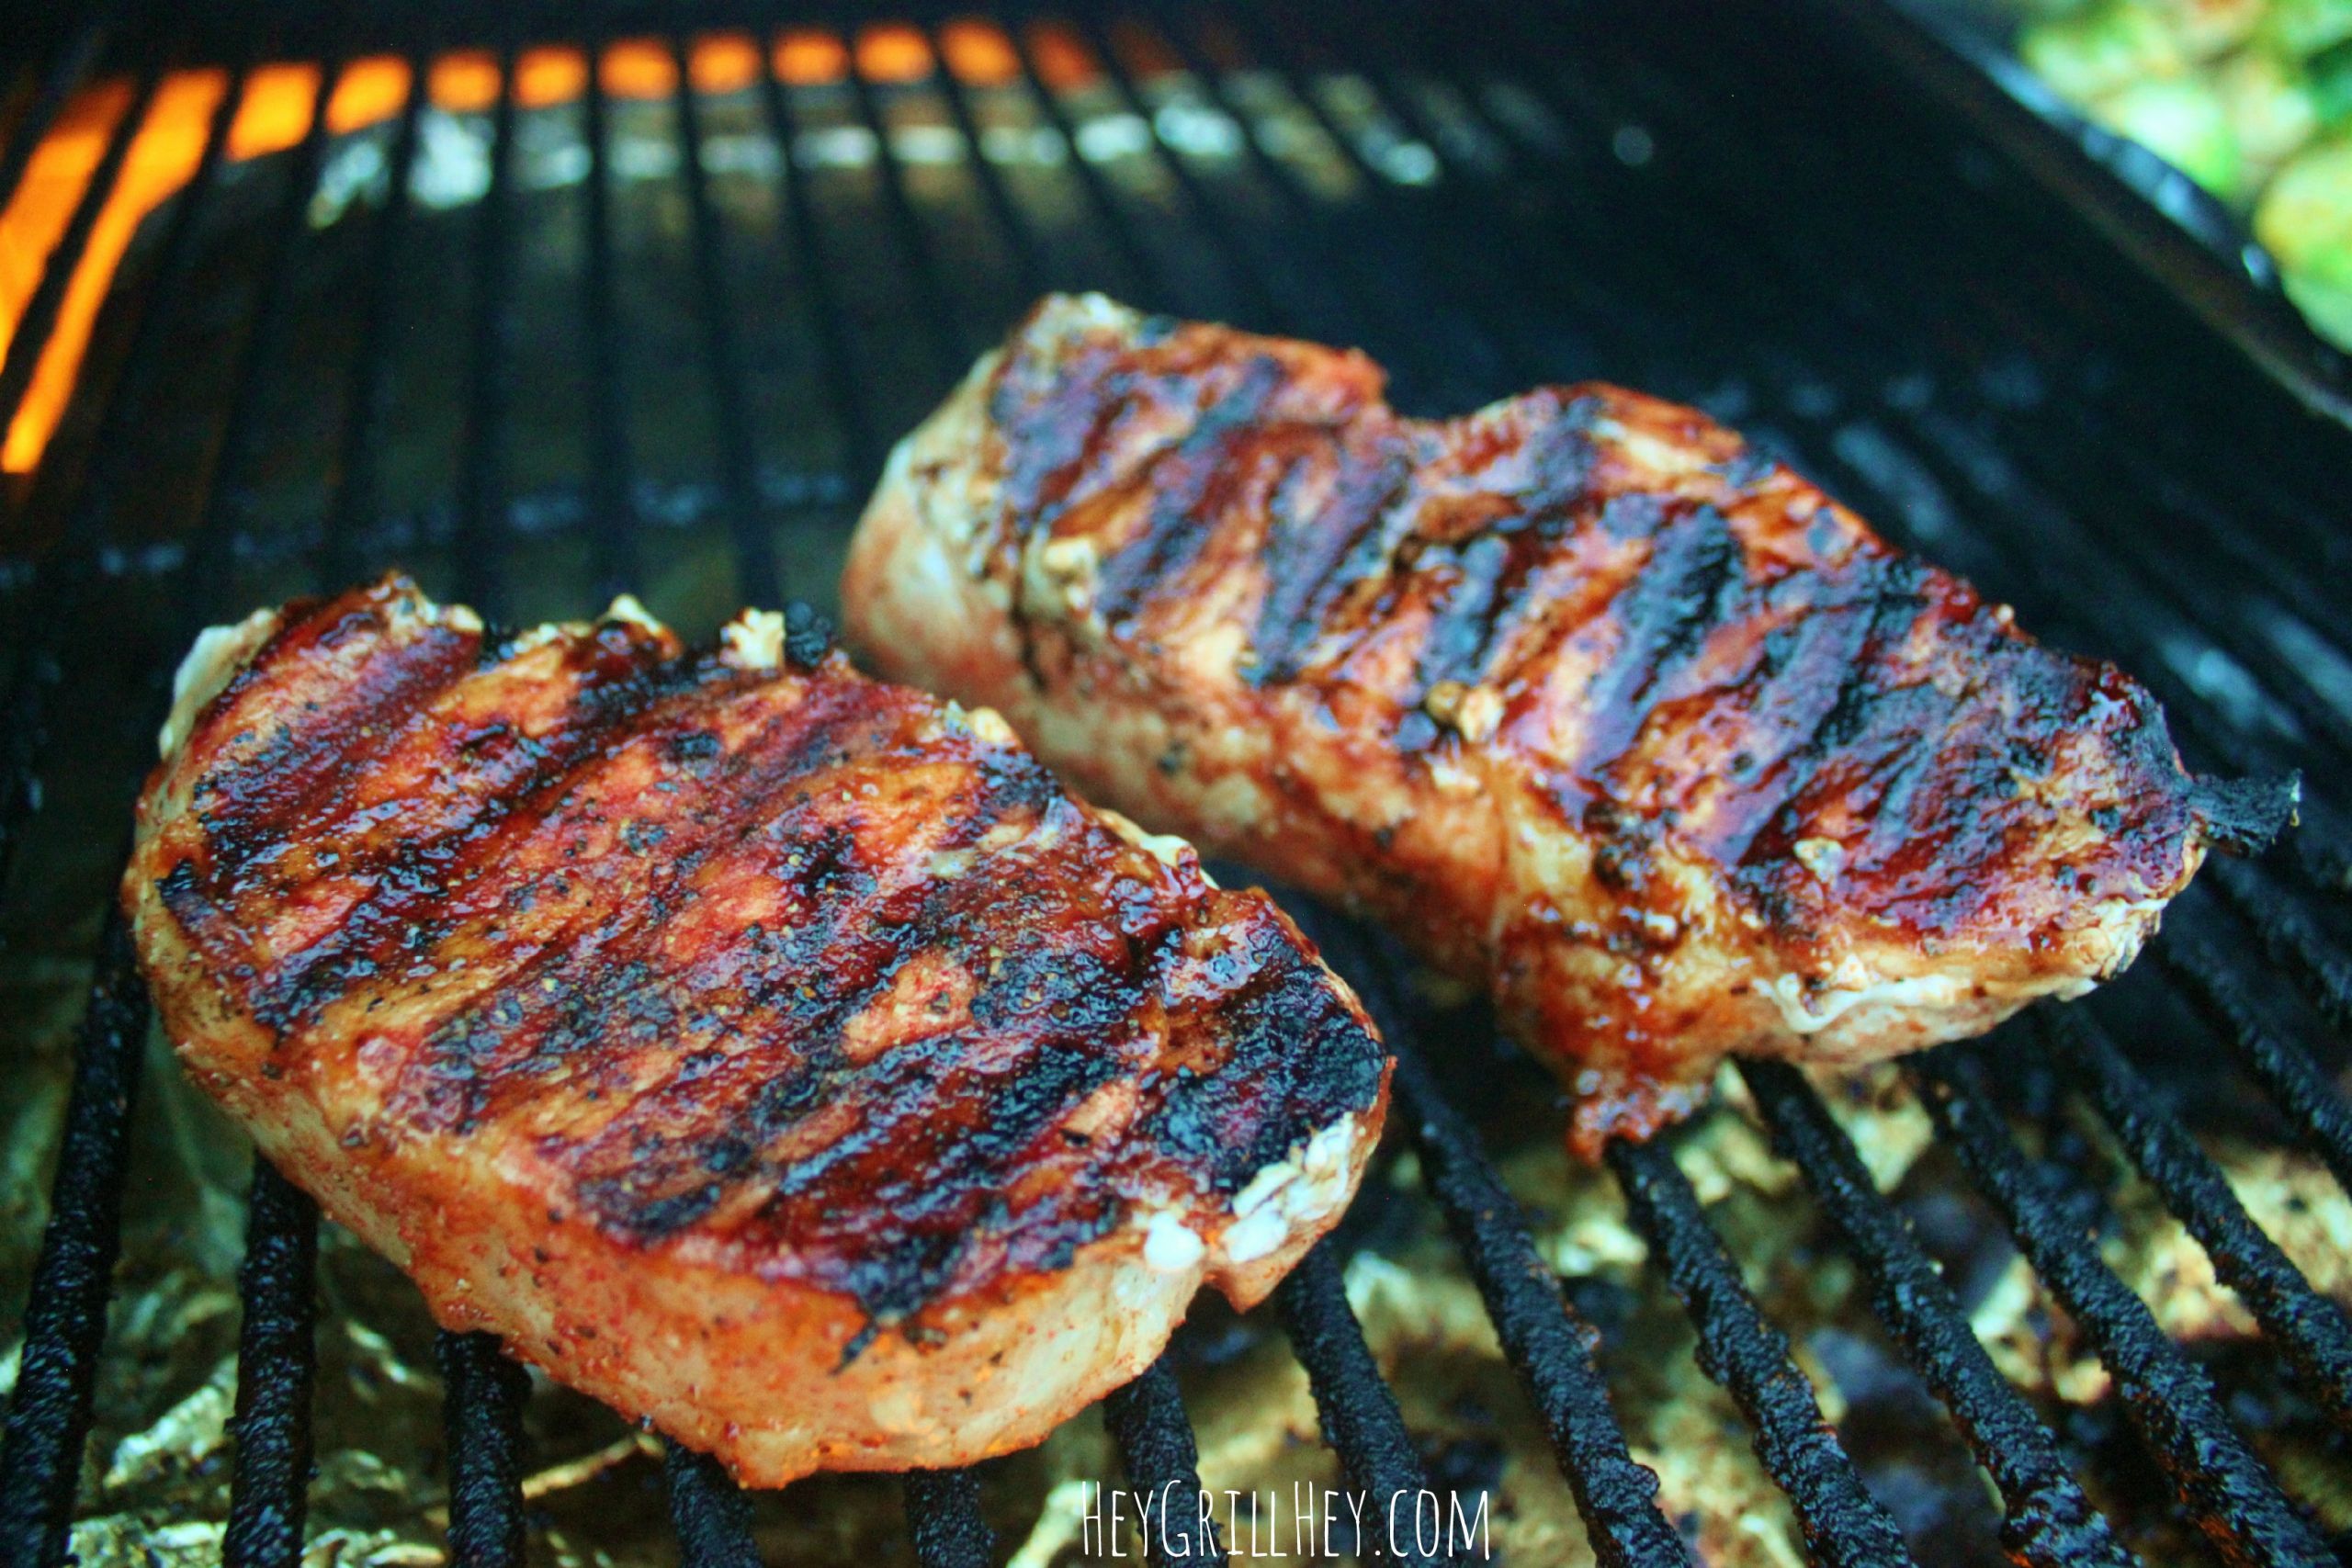 Grilling Pork Chops On Gas Grill
 Simple Grilled Pork Chops with "Secret" Sweet Rub